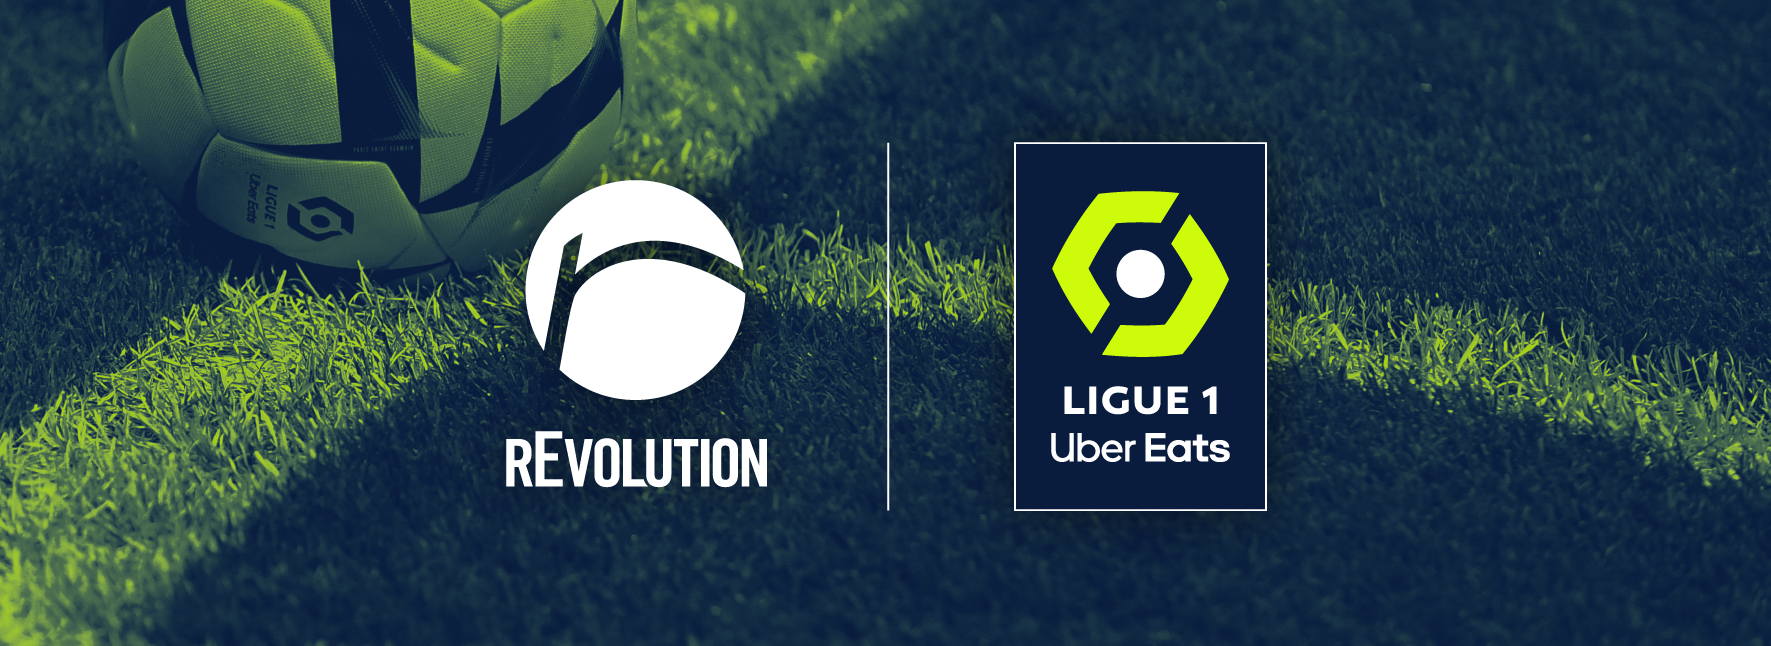 The French Professional Football League (LFP) Announces Plans to Expand Marketing Efforts of Ligue 1 Uber Eats in the U.S.